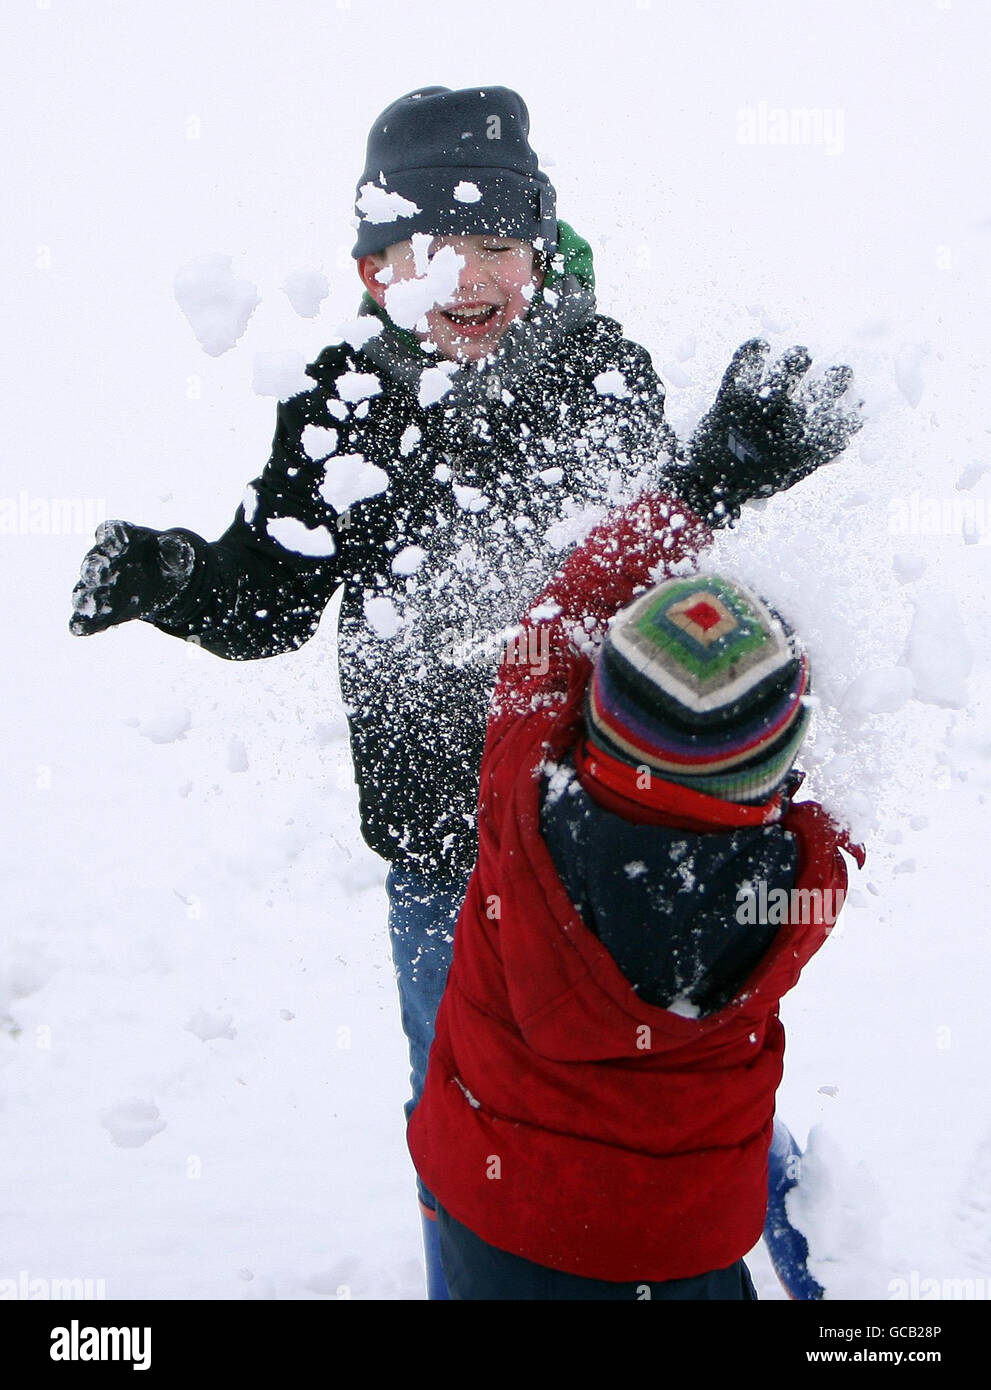 Daniel Egerton and his brother James from Bingham, Nottinghamshire enjoy playing in the snow. Stock Photo